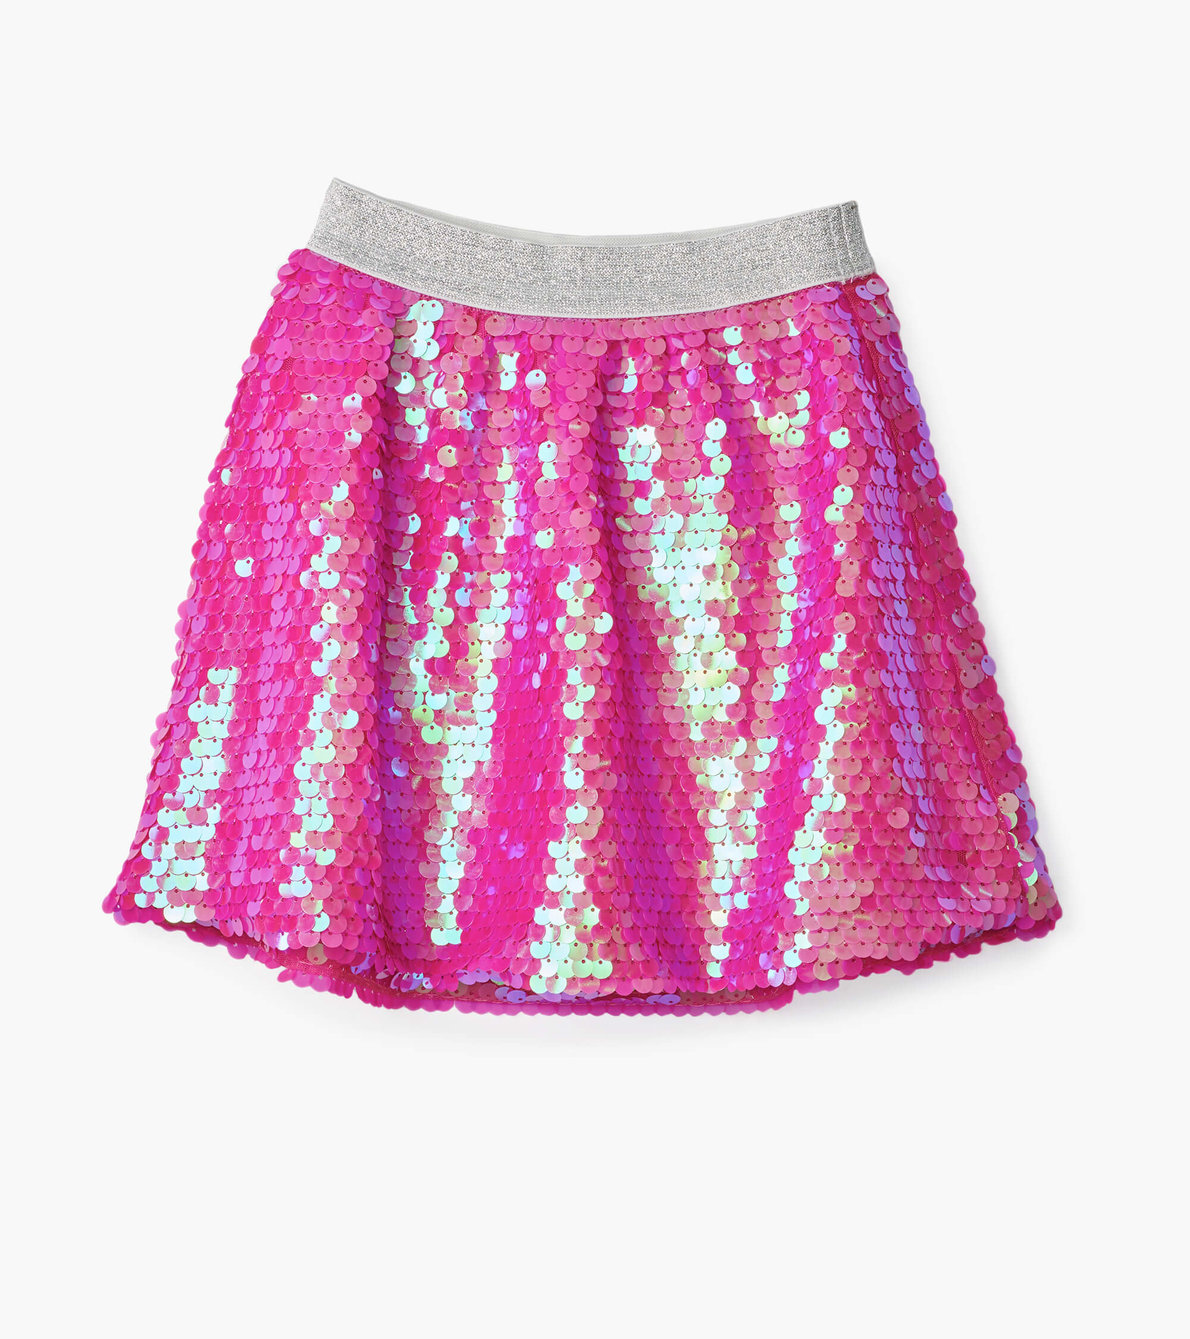 View larger image of Pink Shimmer Sequin Skirt